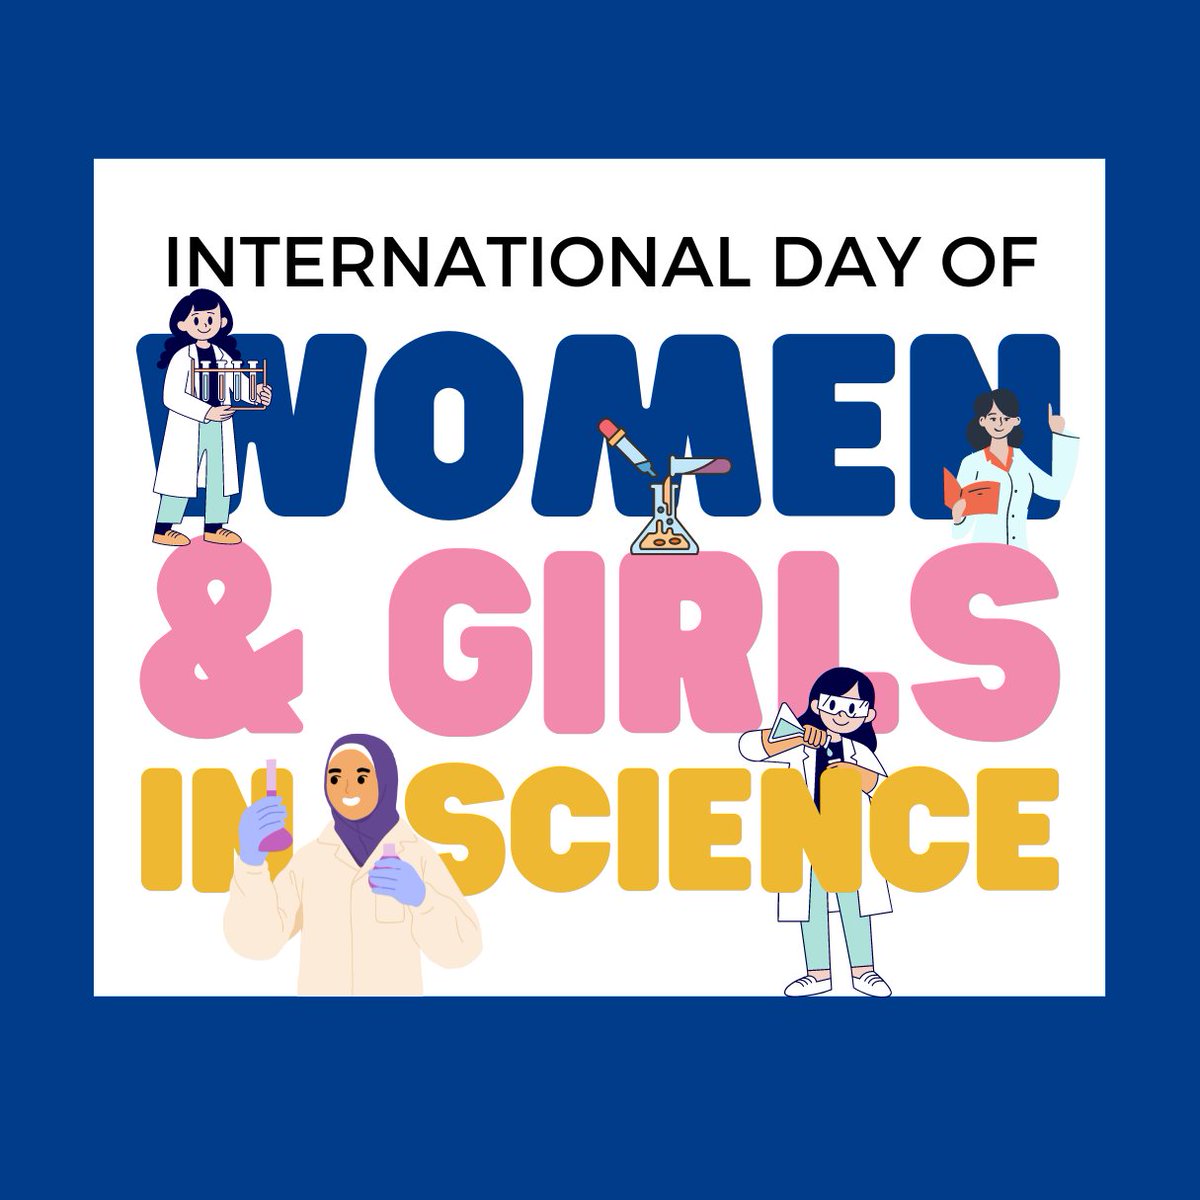 ✨ To the International Day of Women and Girls in Science👩‍🔬: We celebrate all women who are driving forward research with their incredible contributions - to global science and of course, SimTech. Let's strive towards more equal opportunities and diversity!💪 #WomenInScience